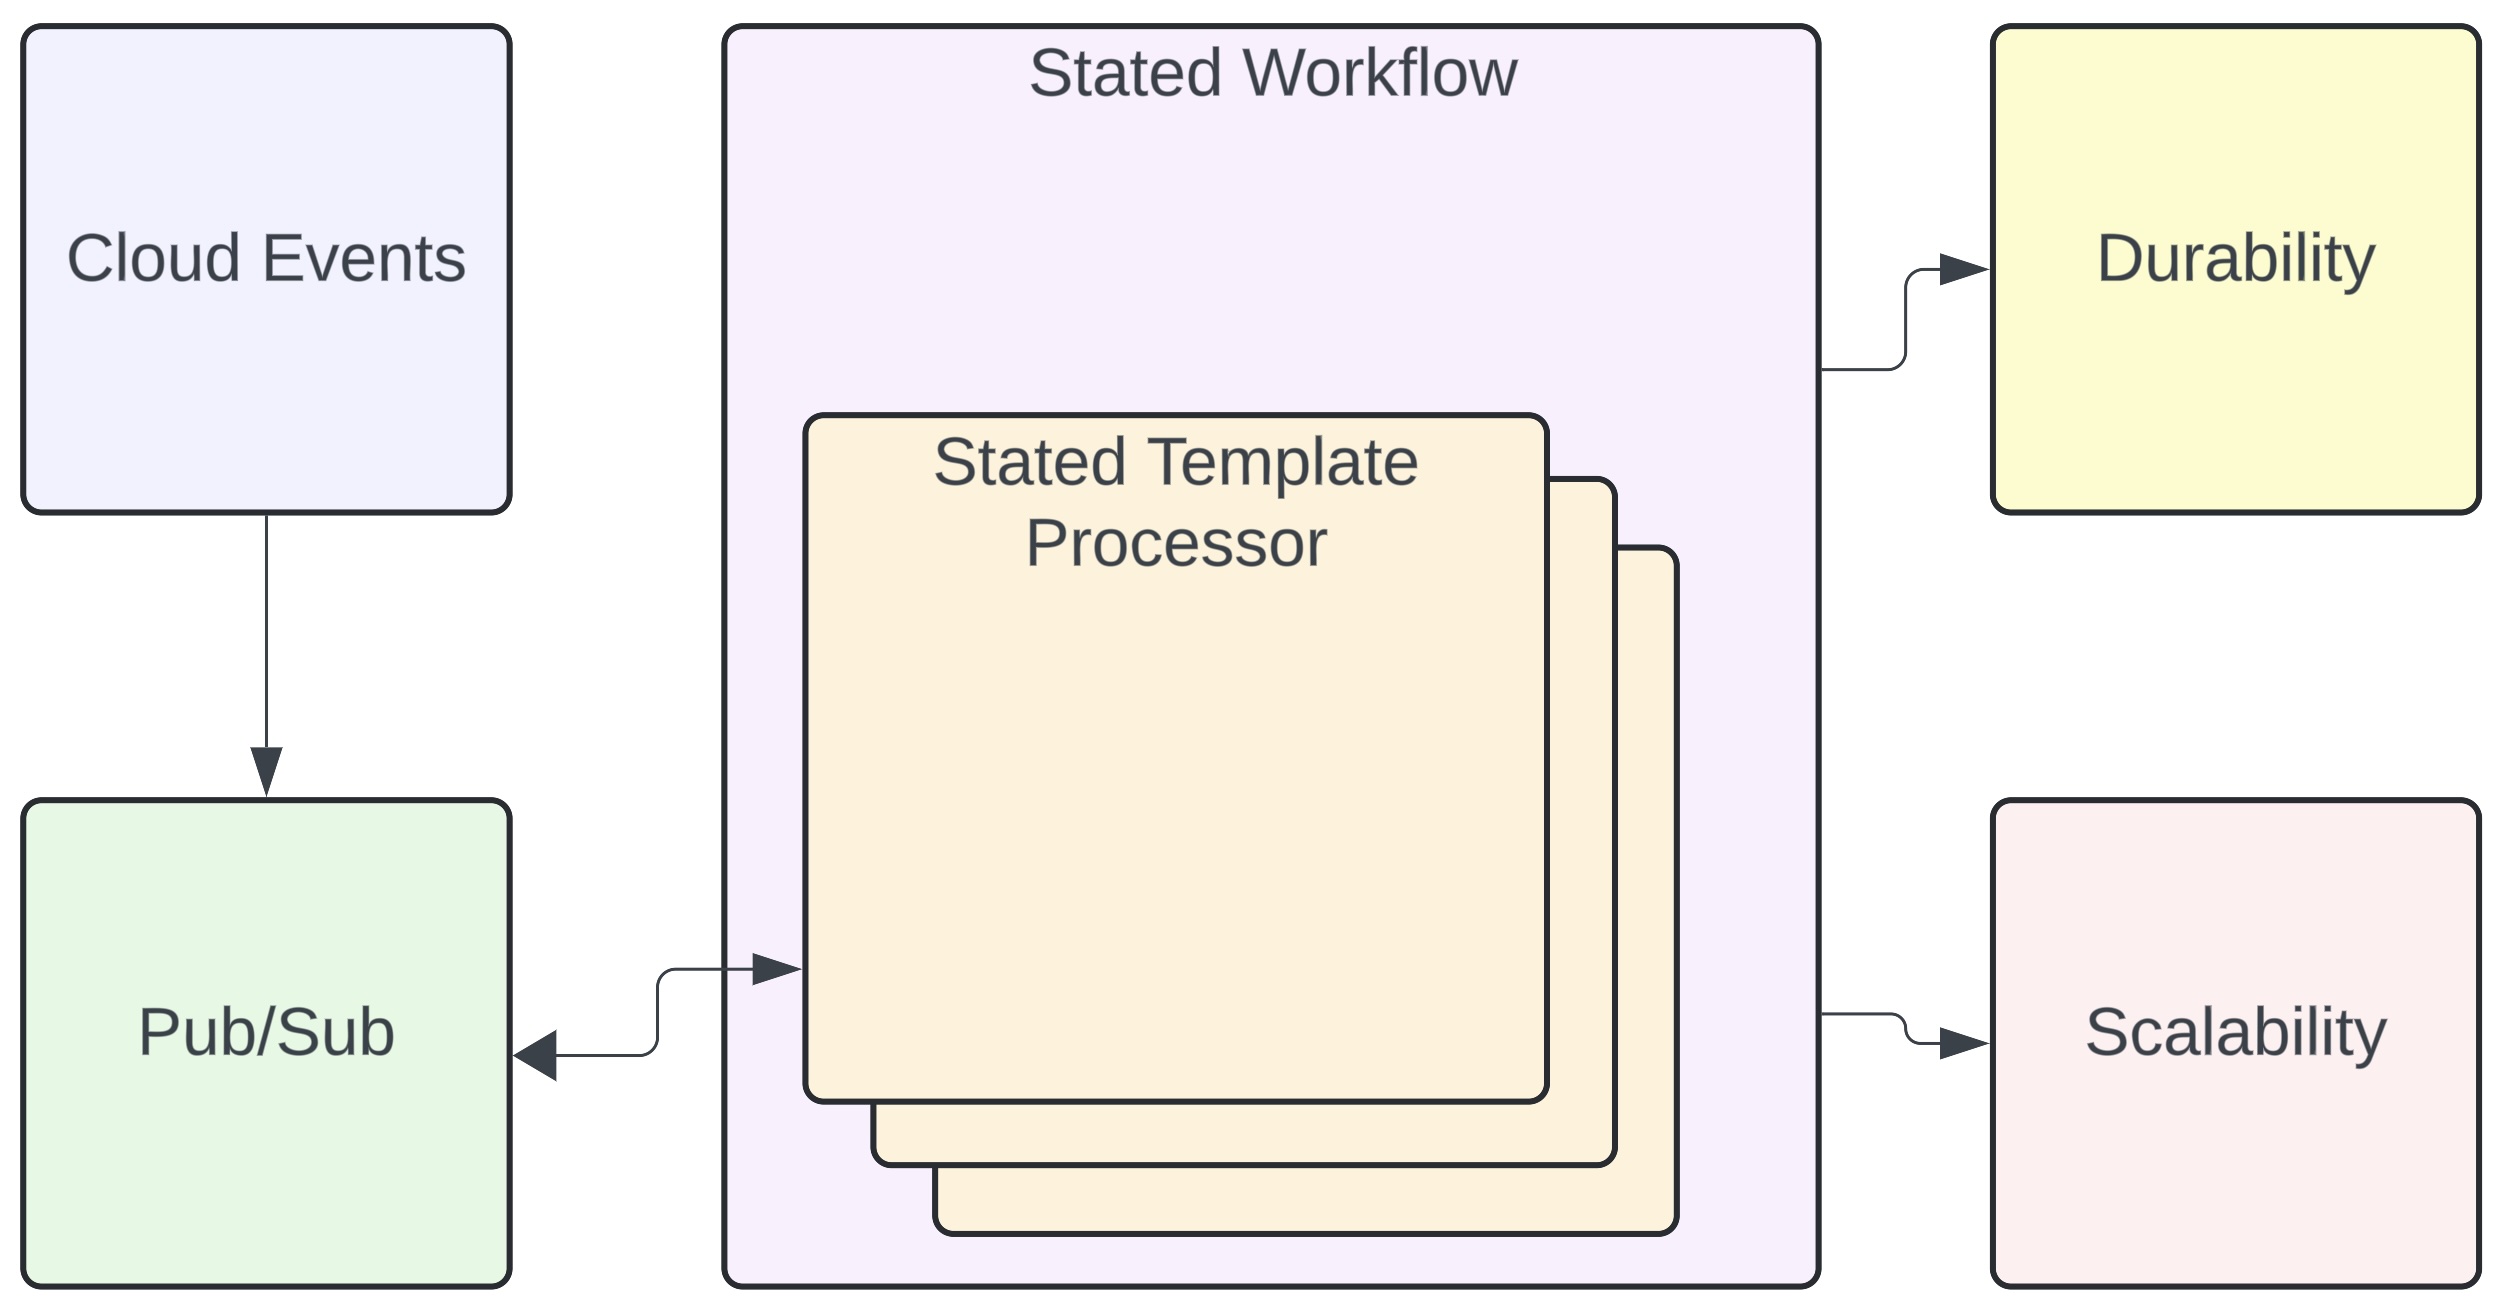 Stated Workflow High-level diagram